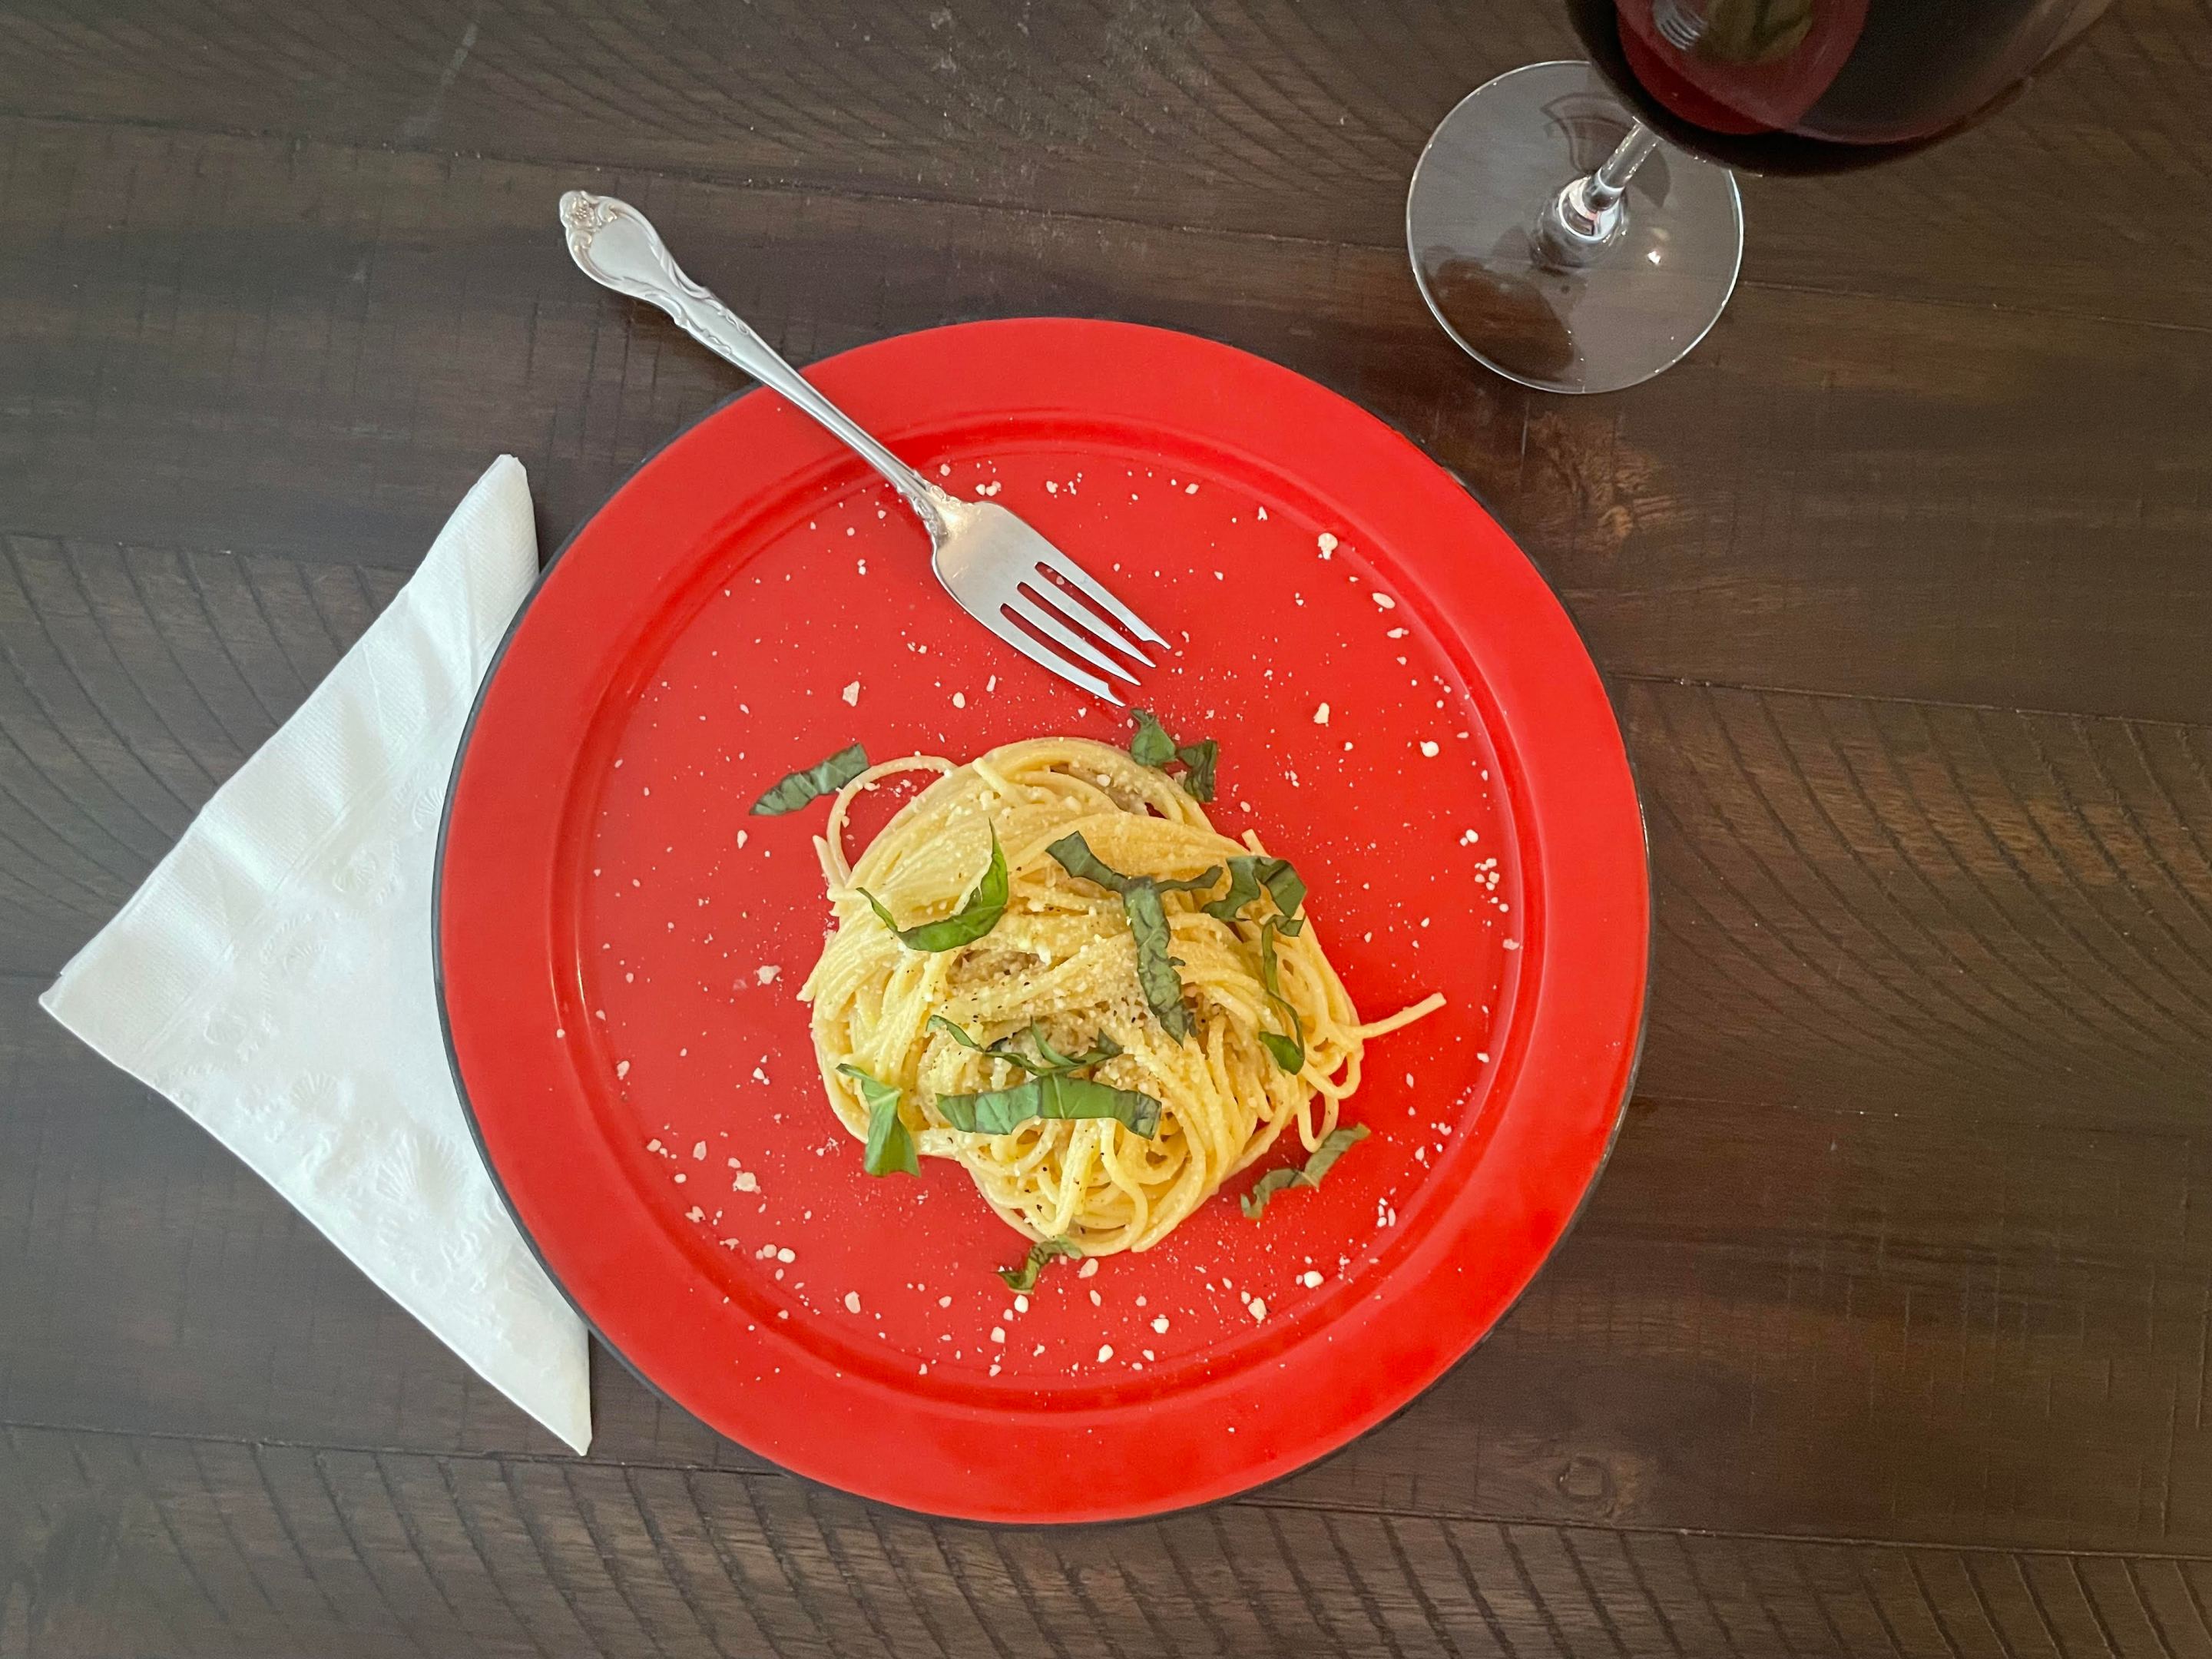 a plate of Pasta al Limone on a wooden table.